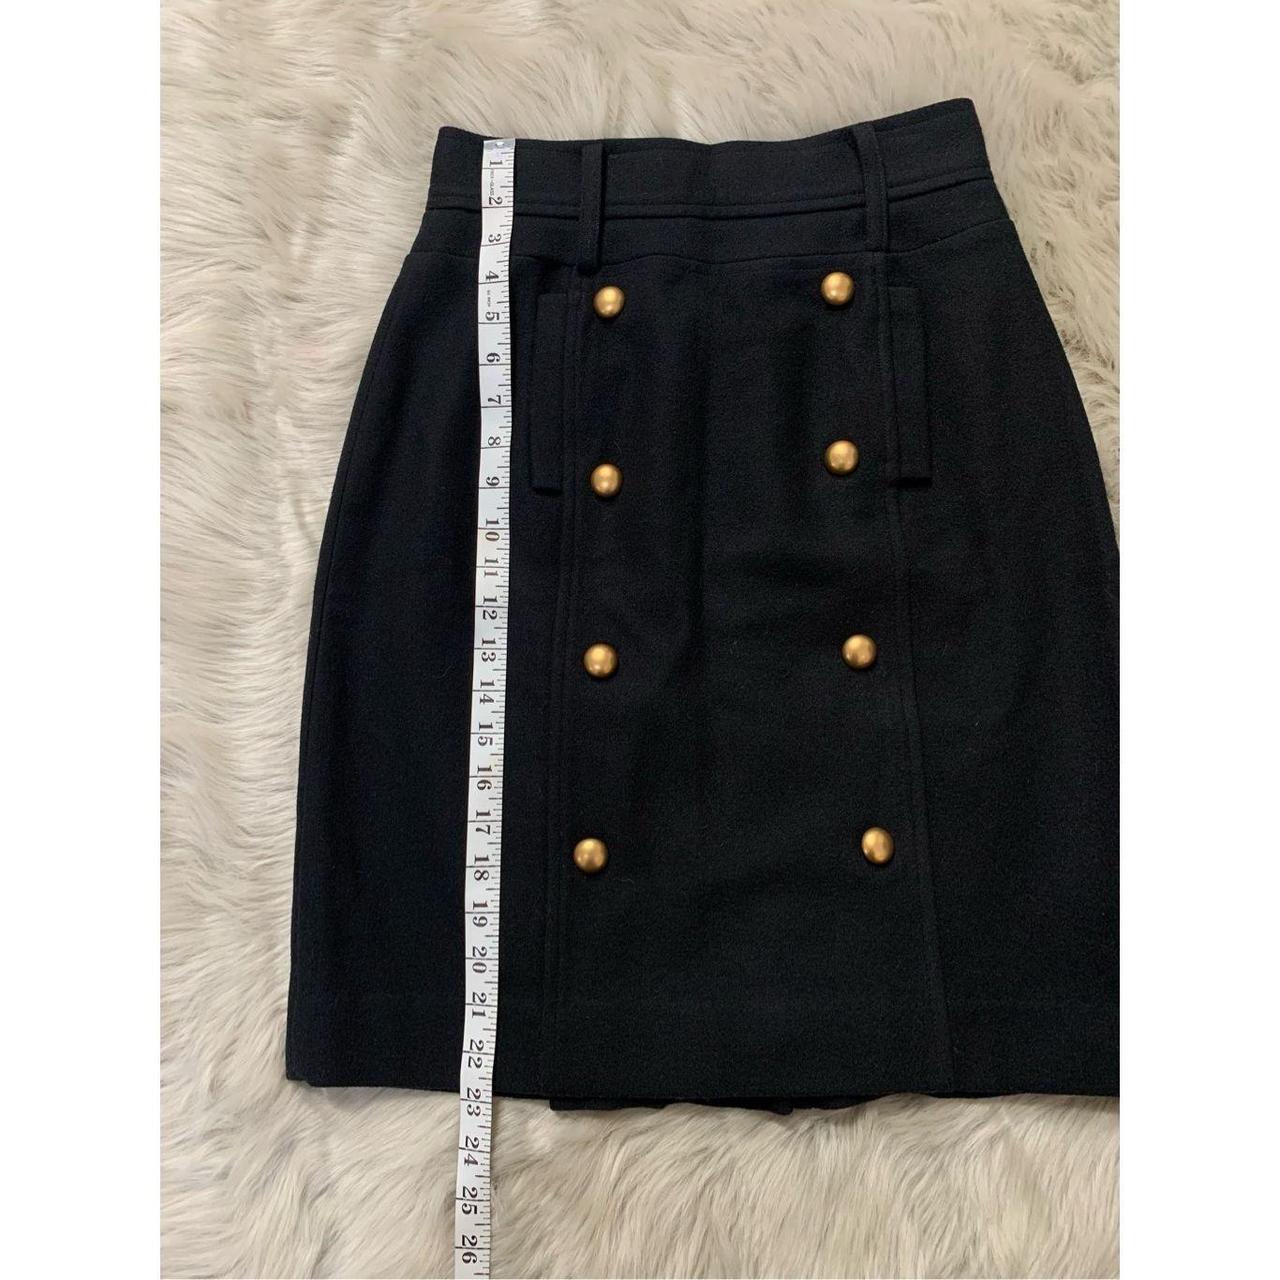 Camilla and Marc Women's Black and Gold Skirt (8)